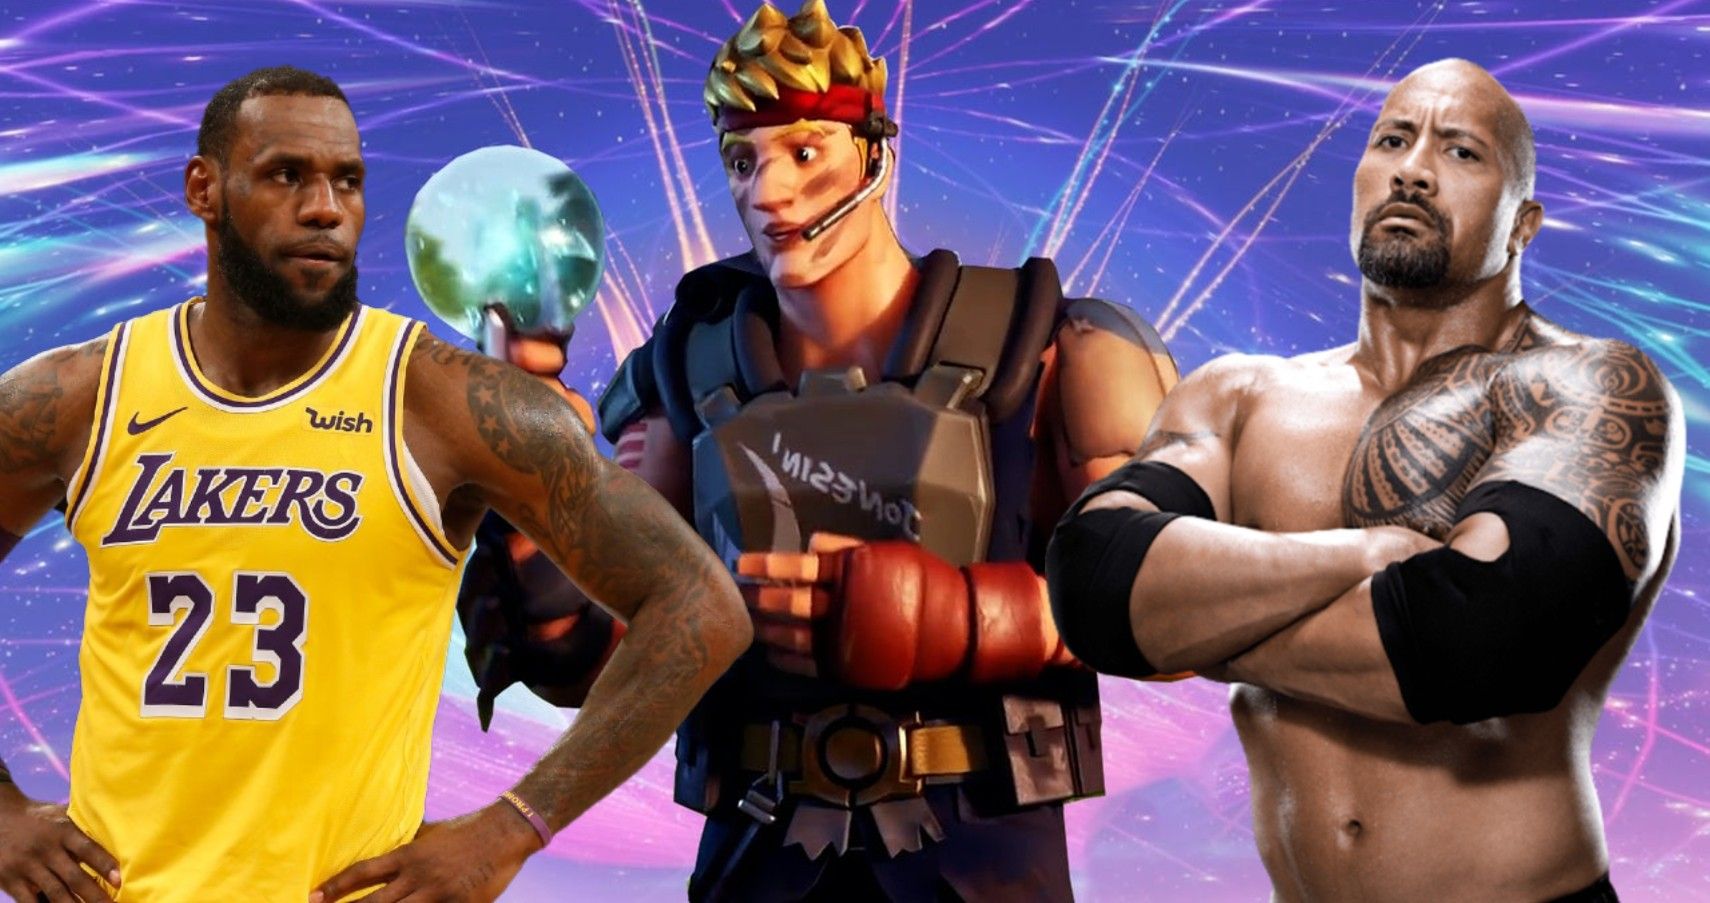 Epic Documents Reveal Plans For Lebron James And The Rock Fortnite Collaborations